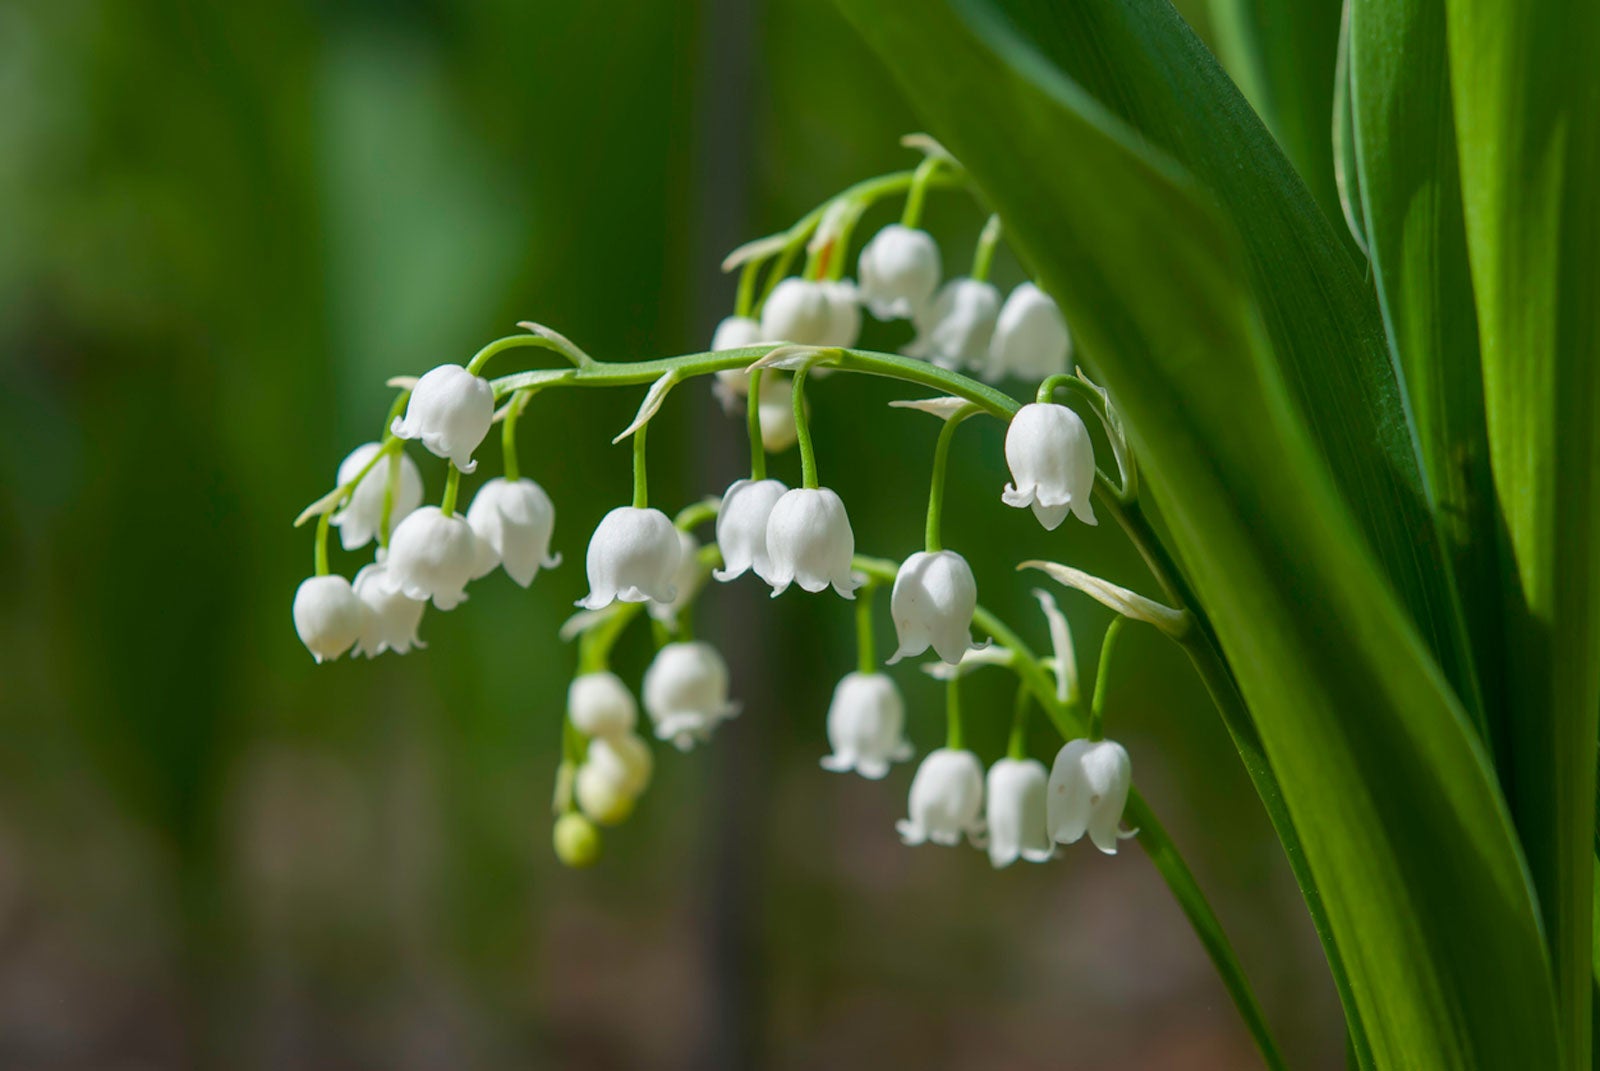 Planting Lily Of The Valley Flowers - How To Grow Lily Of The Valley Plants